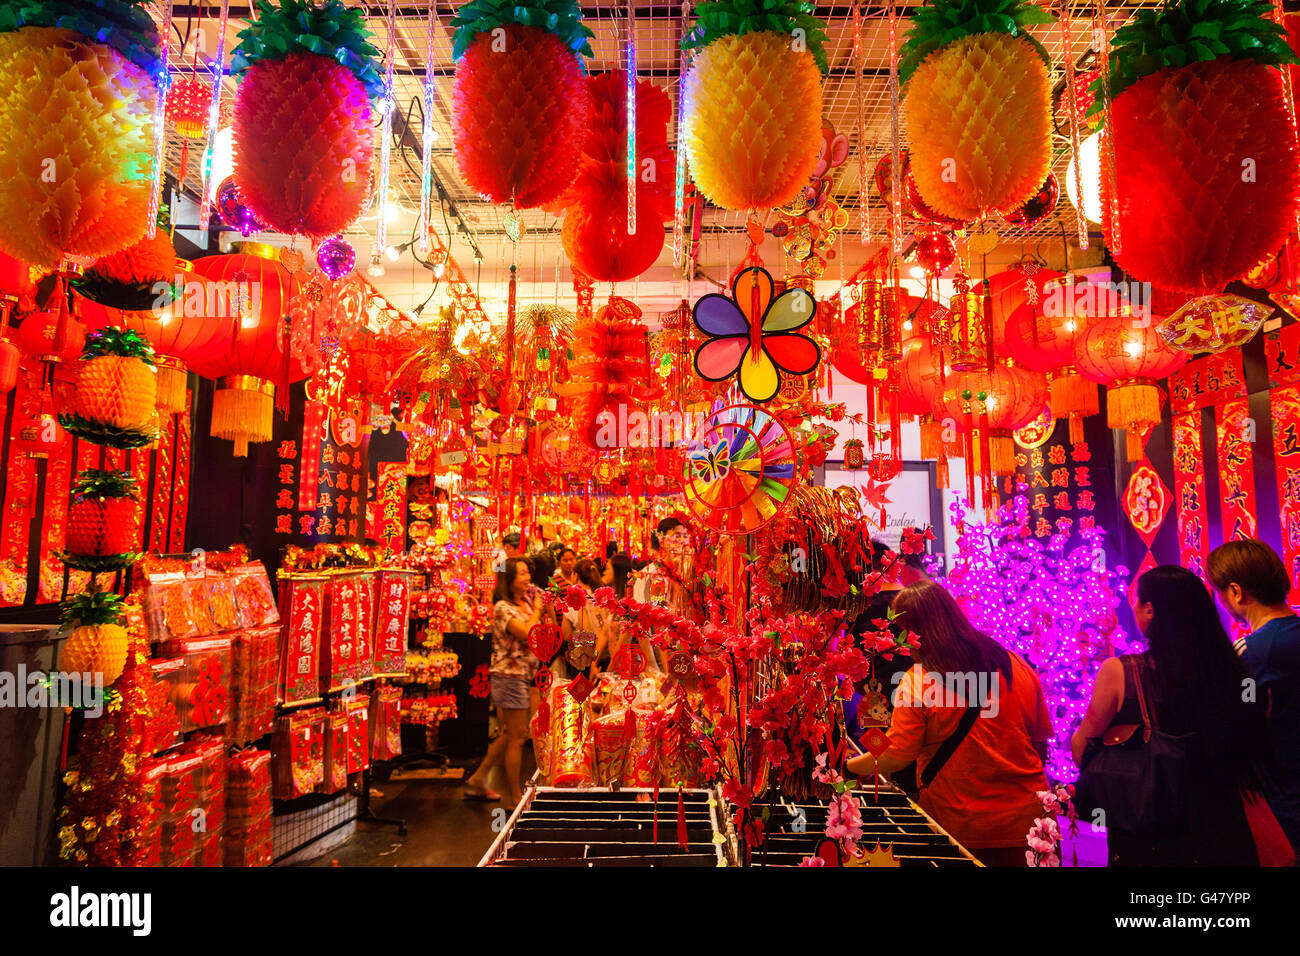 Singapore, Singapore - January 17, 2016: A store in Chinatown sells lanterns and decorations for Chinese New Year celebrations. Stock Photo